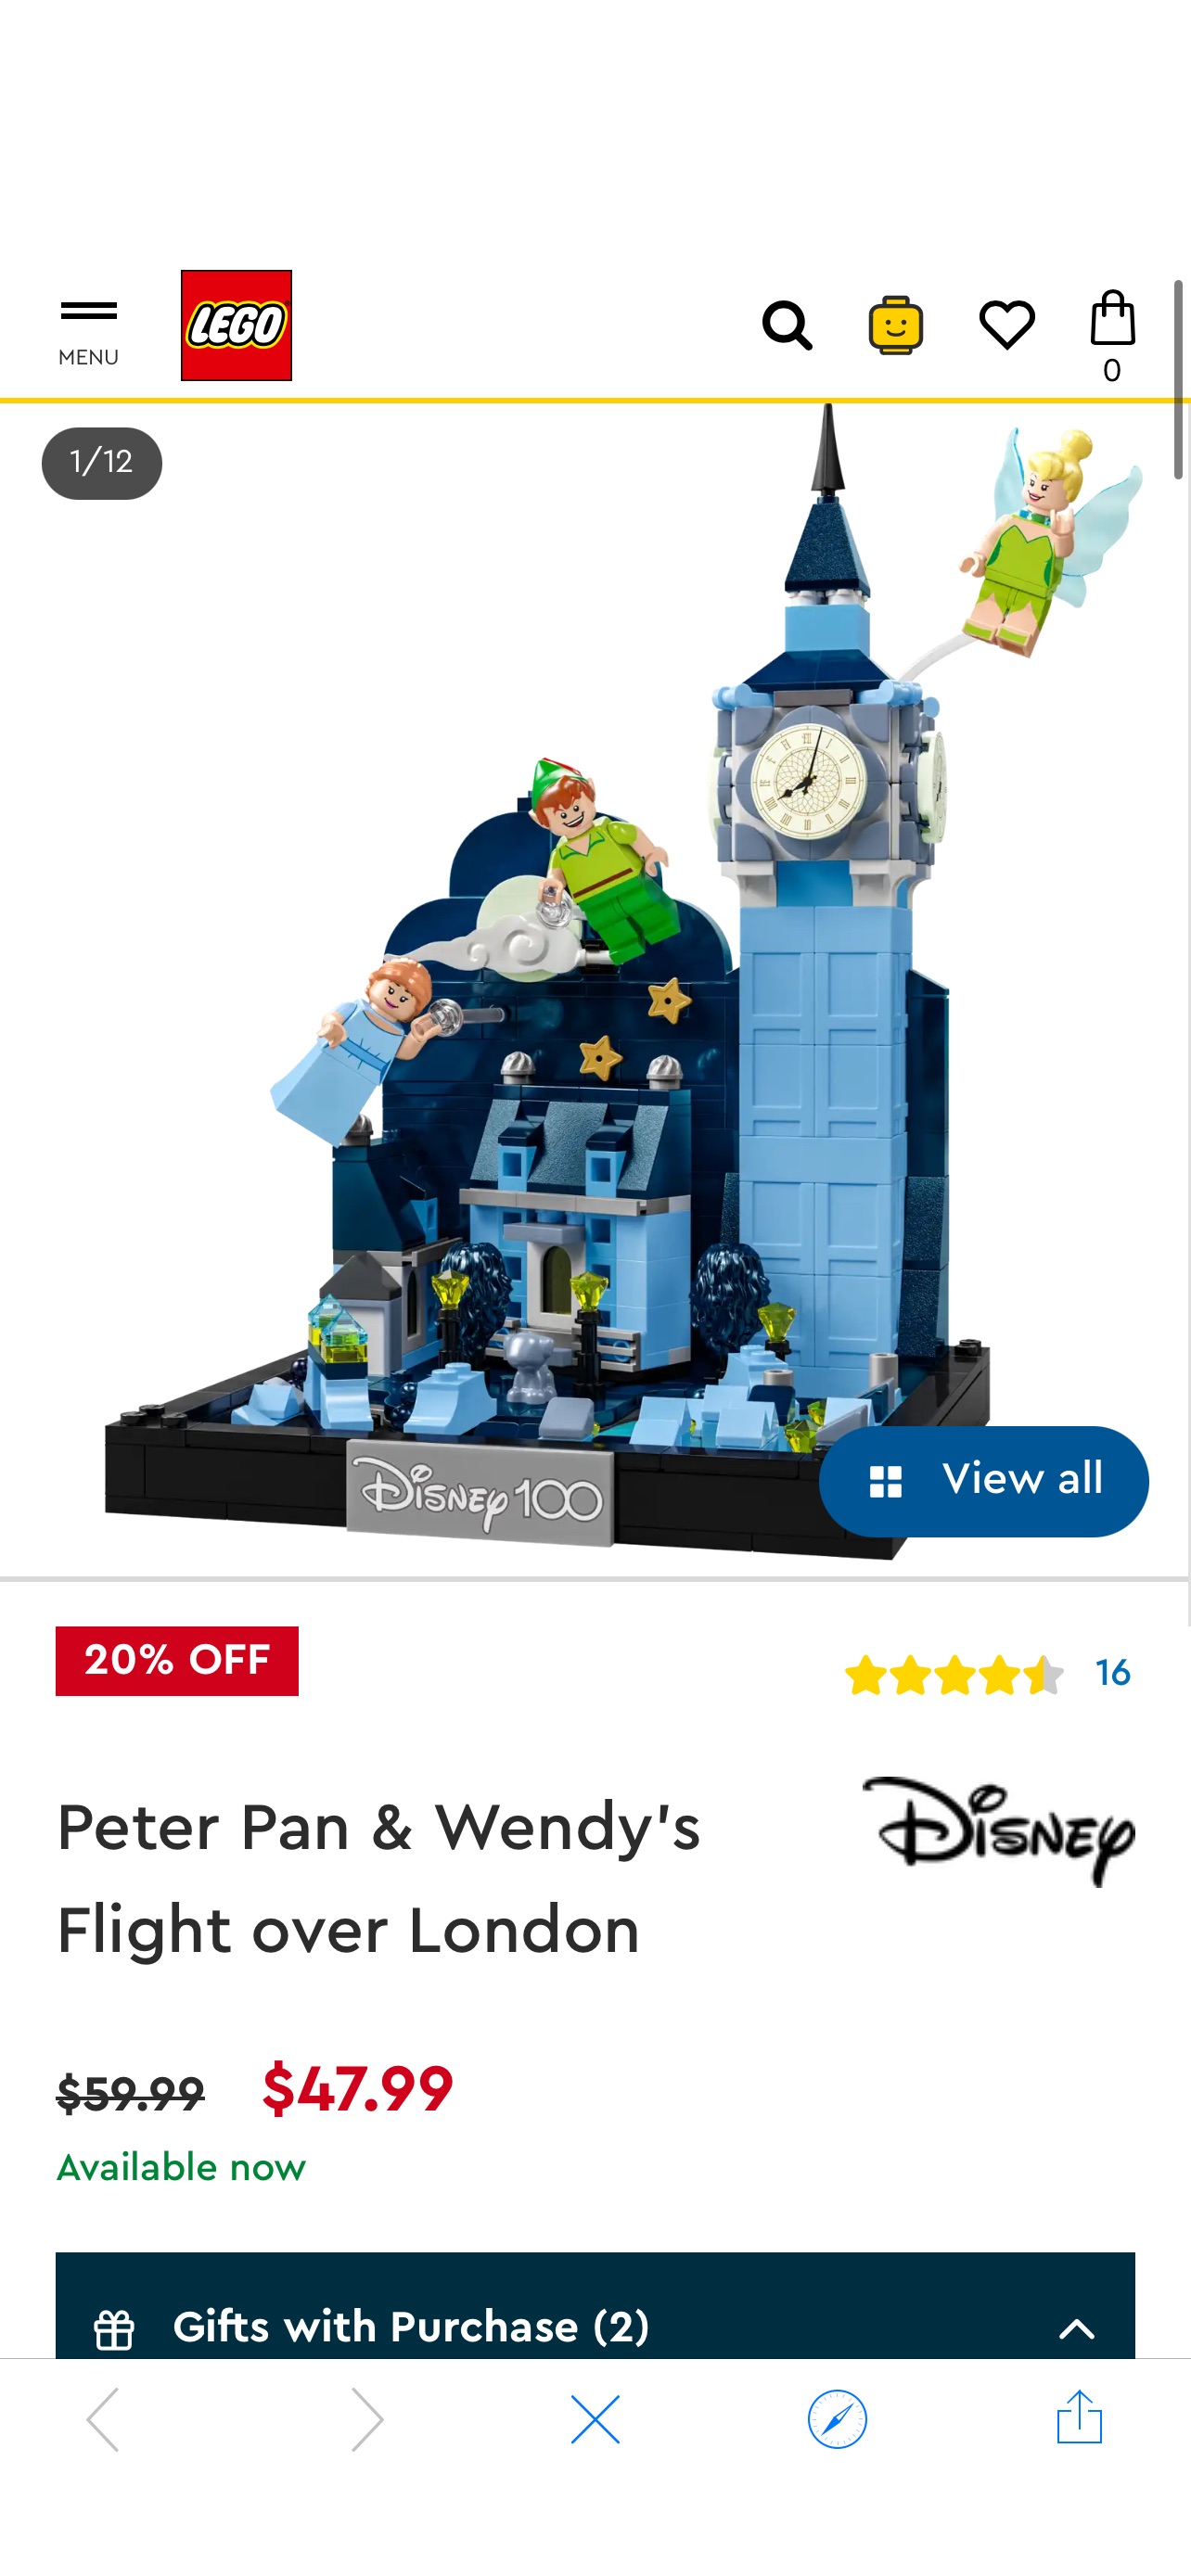 Peter Pan & Wendy's Flight over London 43232 | Disney™ | Buy online at the Official LEGO® Shop US 彼得潘温迪伦敦飞行